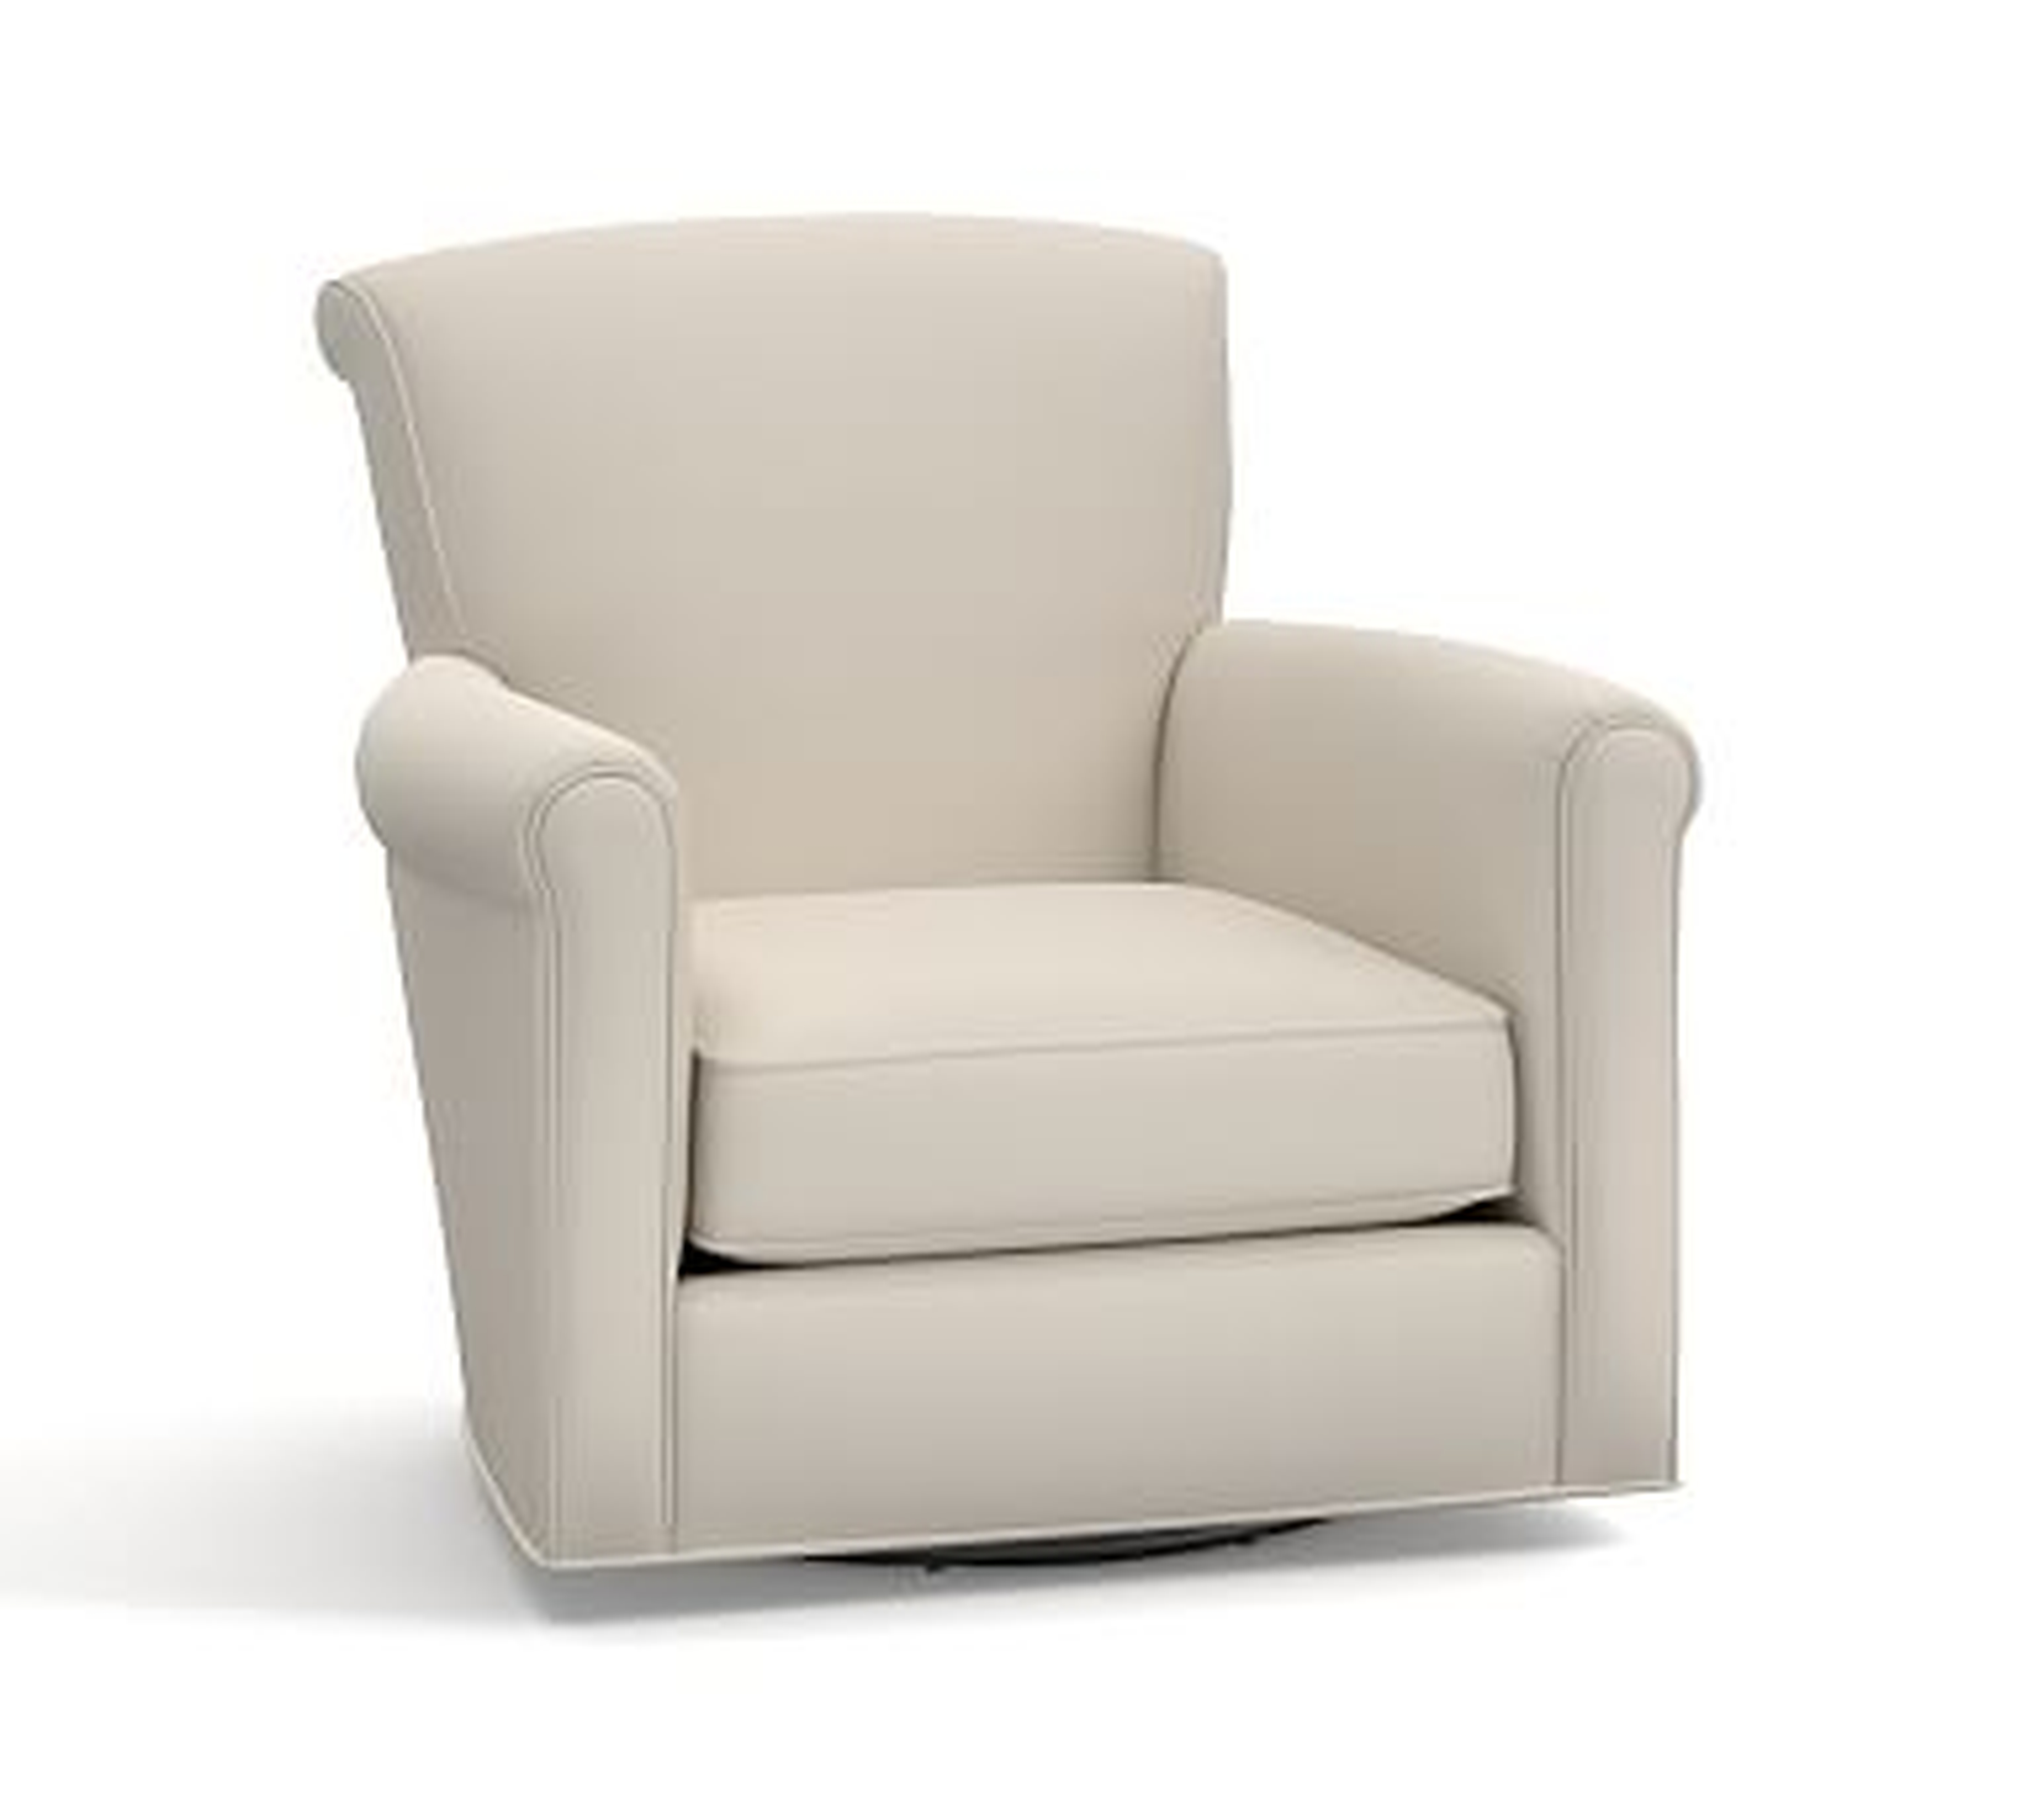 Irving Upholstered Swivel Armchair, Polyester Wrapped Cushions, Twill Cream - Pottery Barn